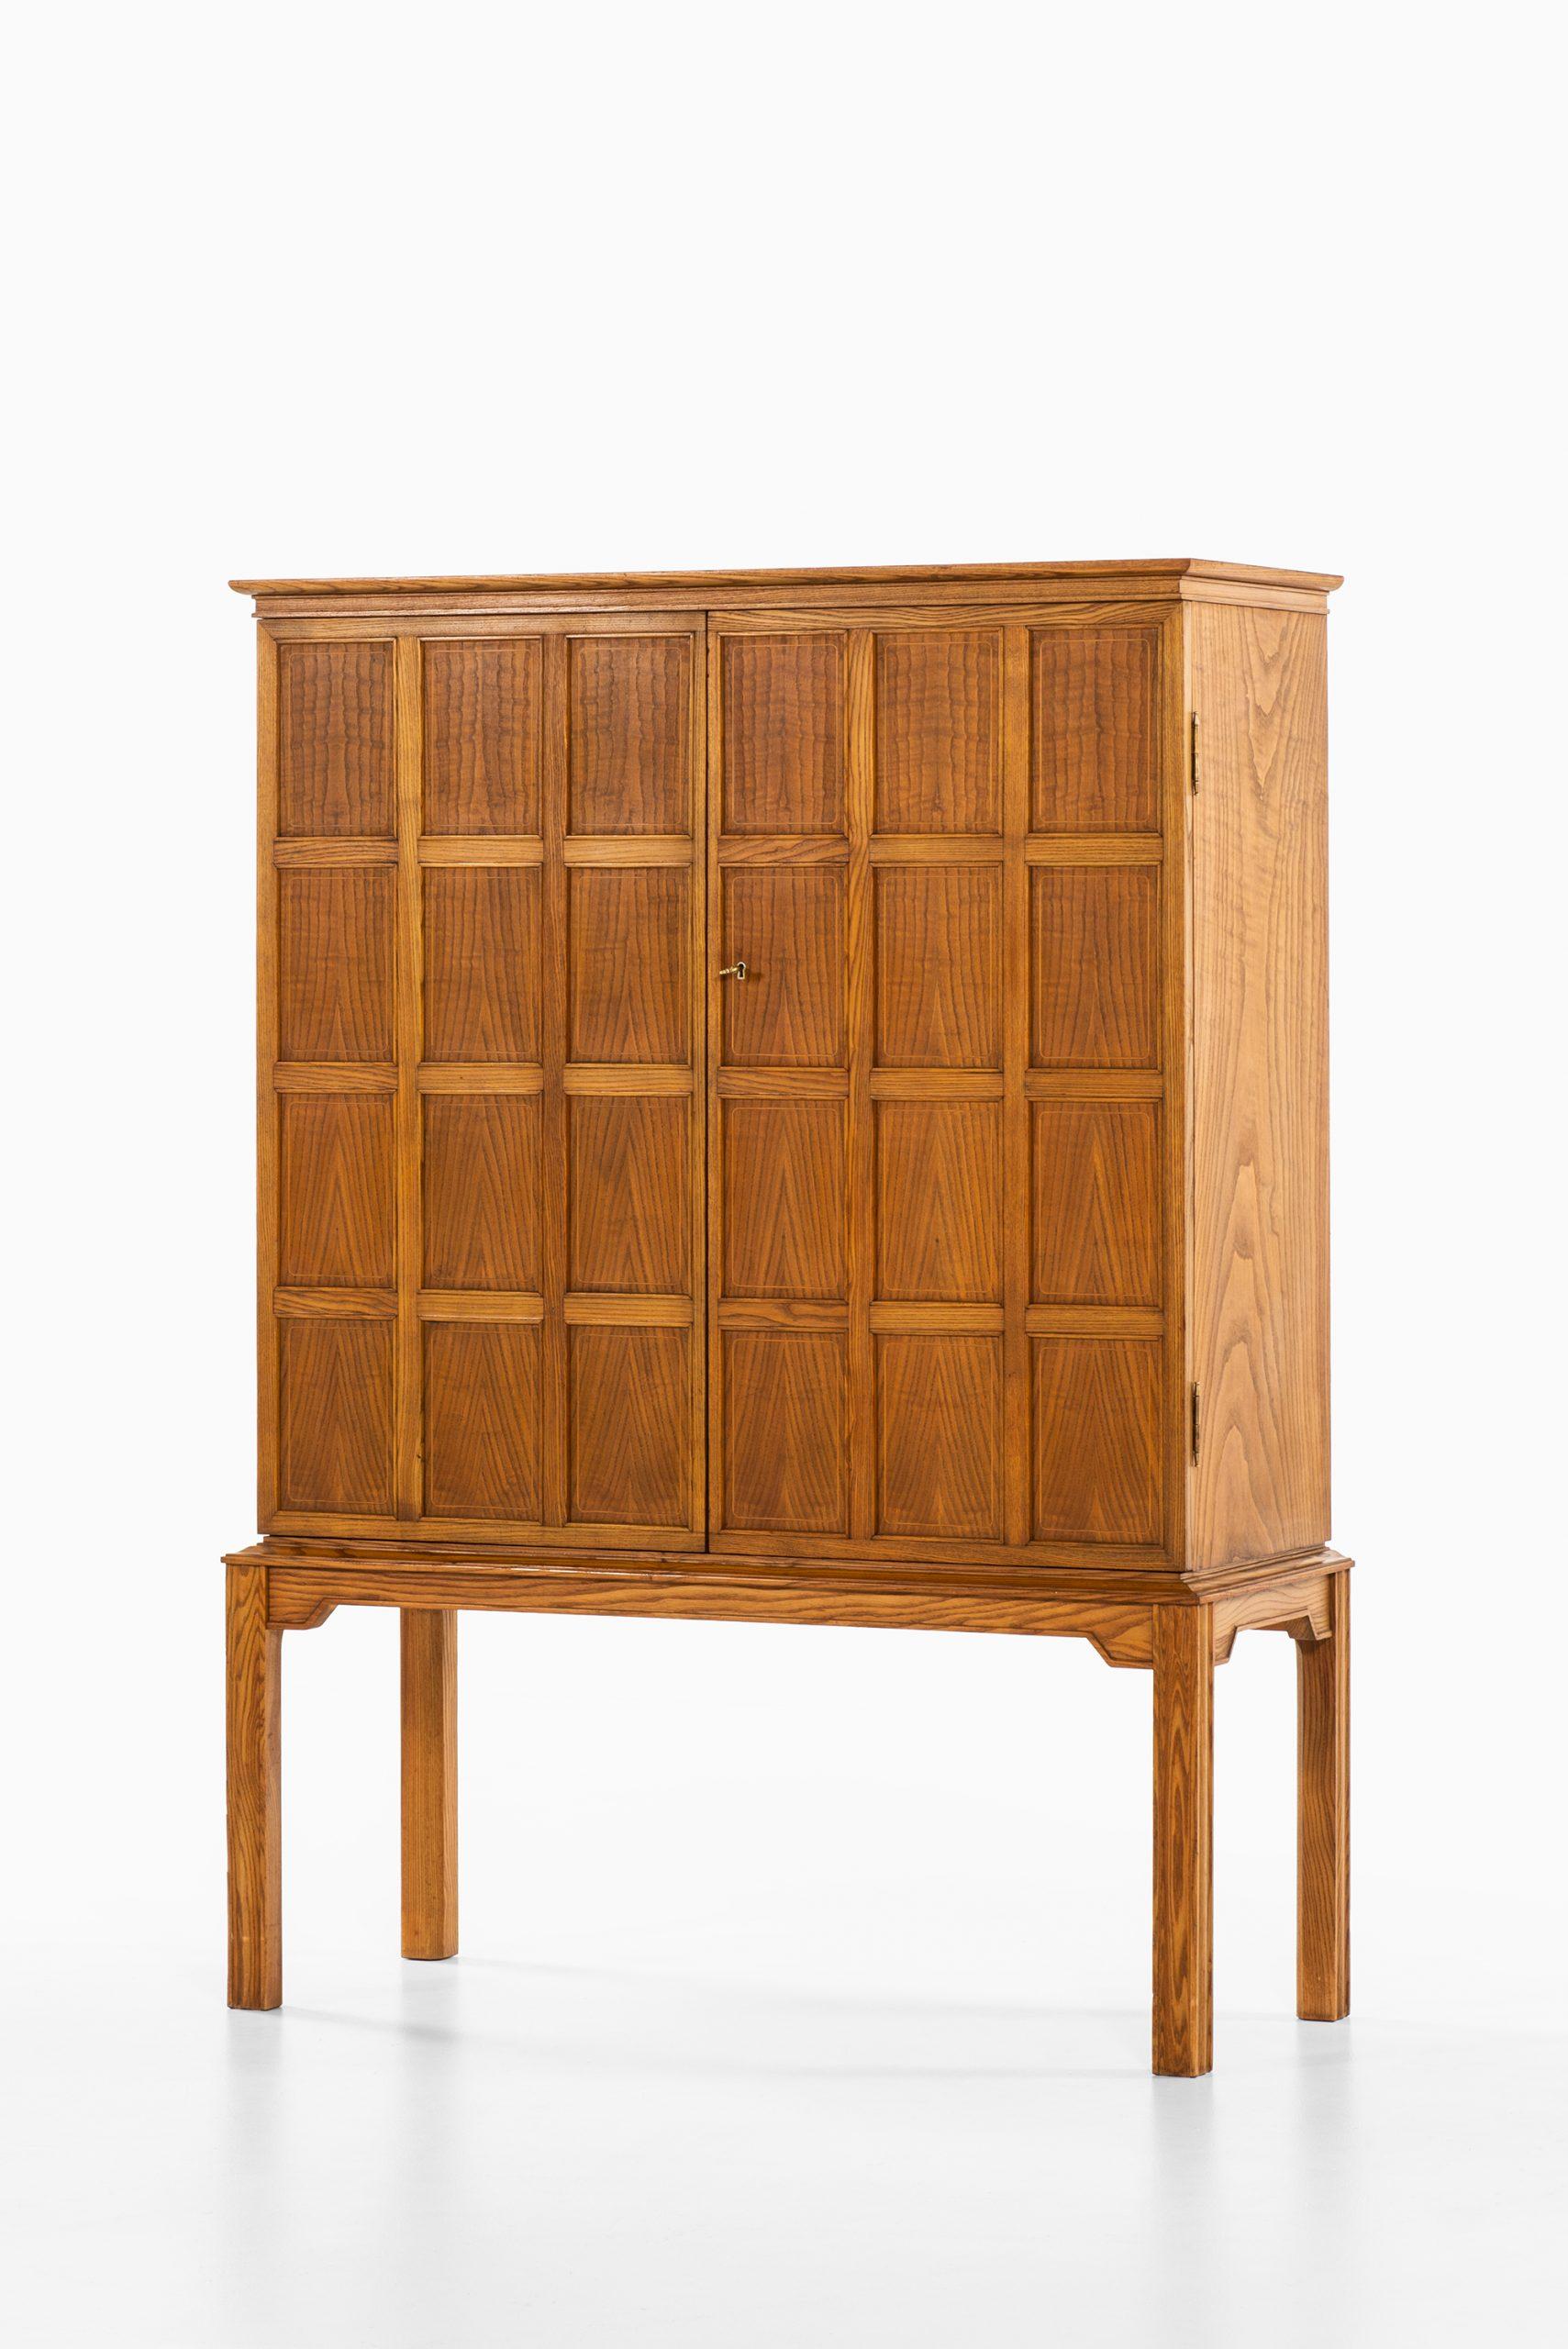 Very rare cabinet designed by Oscar Nilsson. Produced in Sweden.